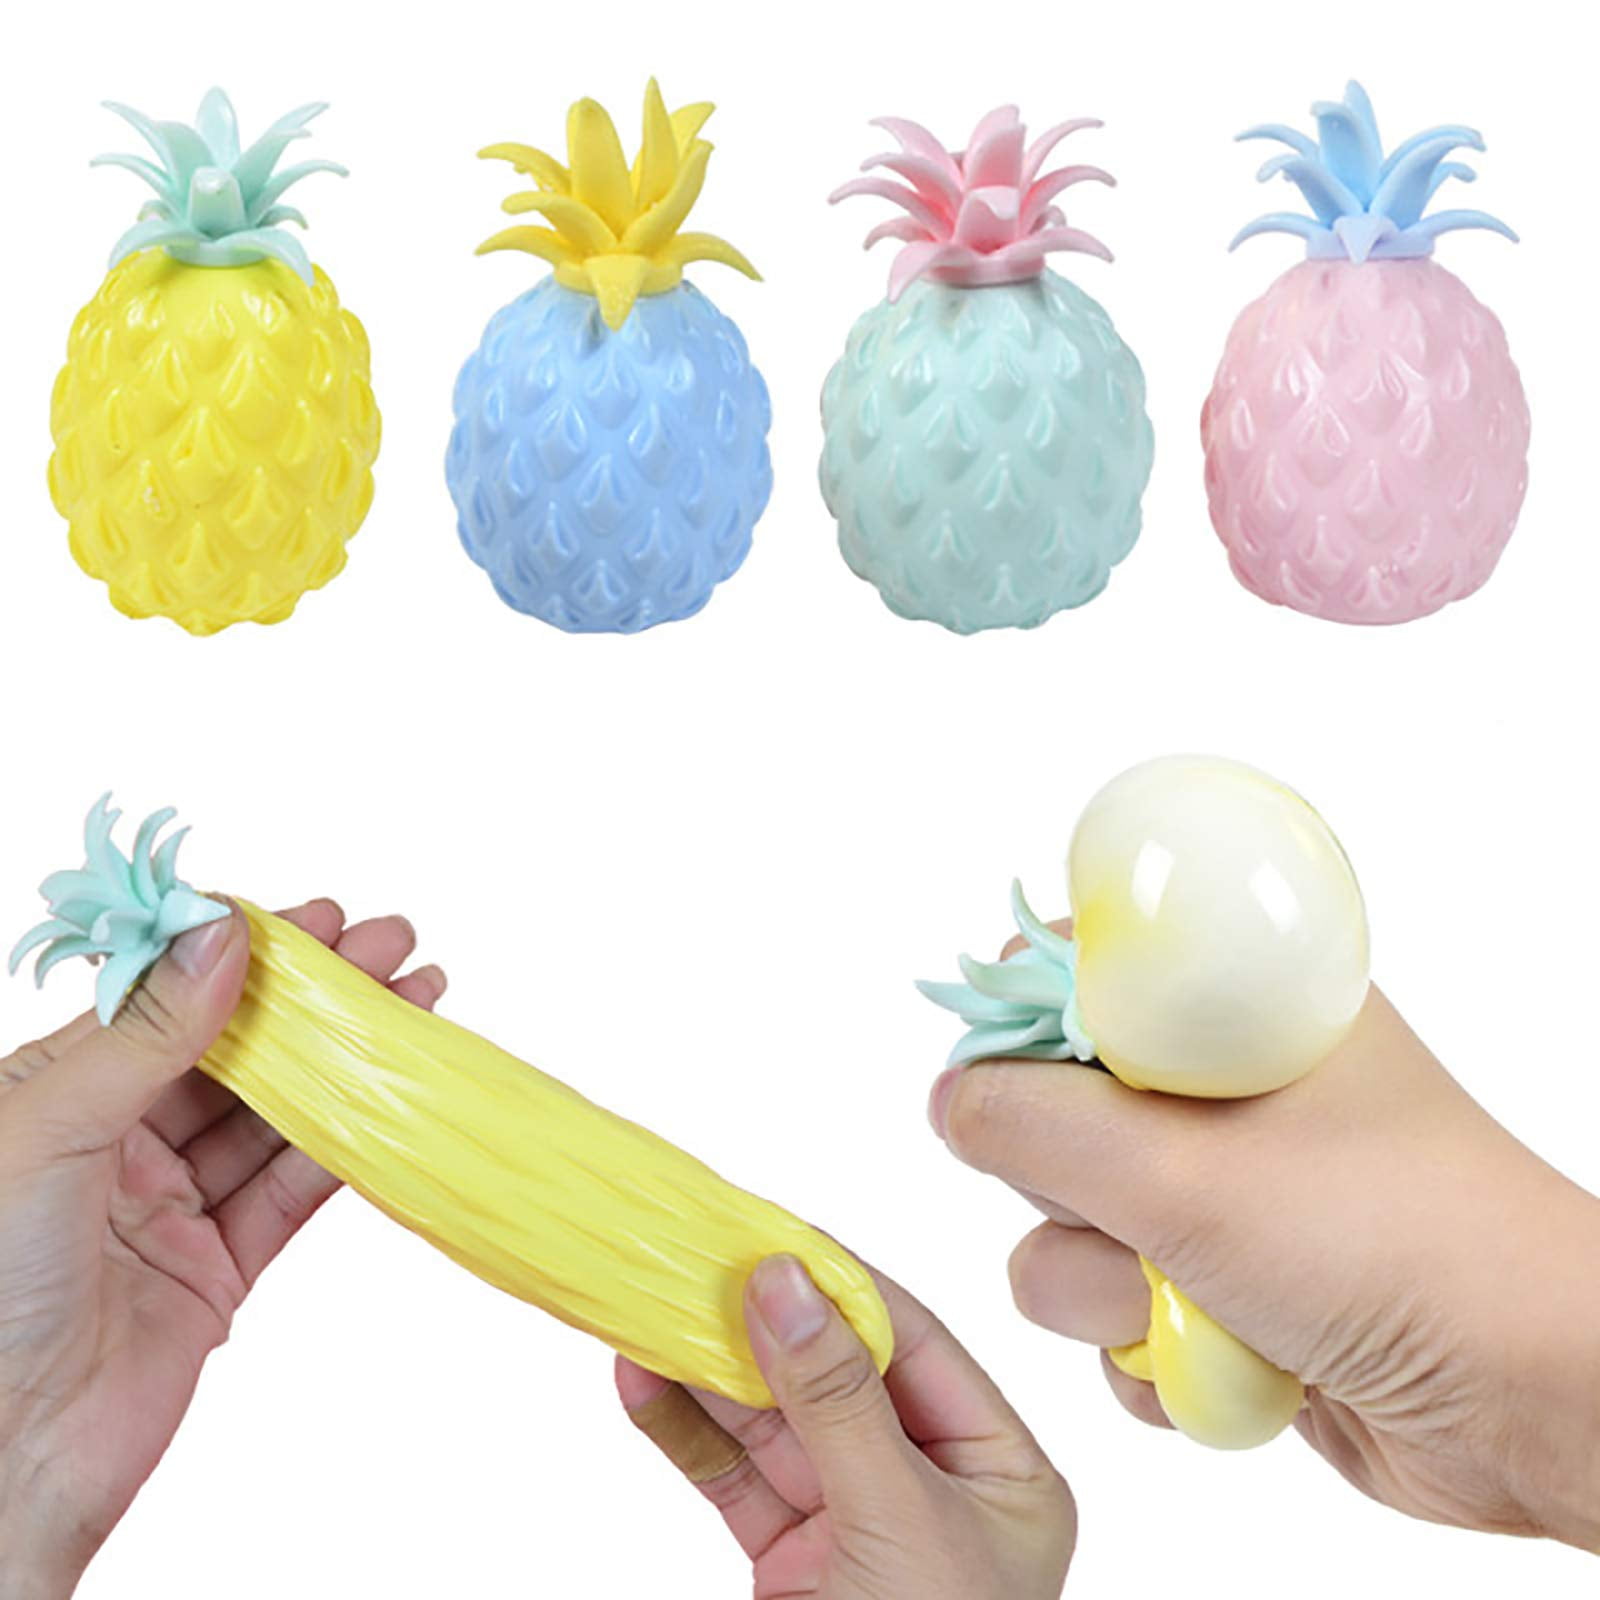 Pull Calm Rethilkry 4Colors Pineapple Stress Balls Toy Tropical Fruit and Stretch Promote Stress Relief Gel Water Beads- Squeeze 